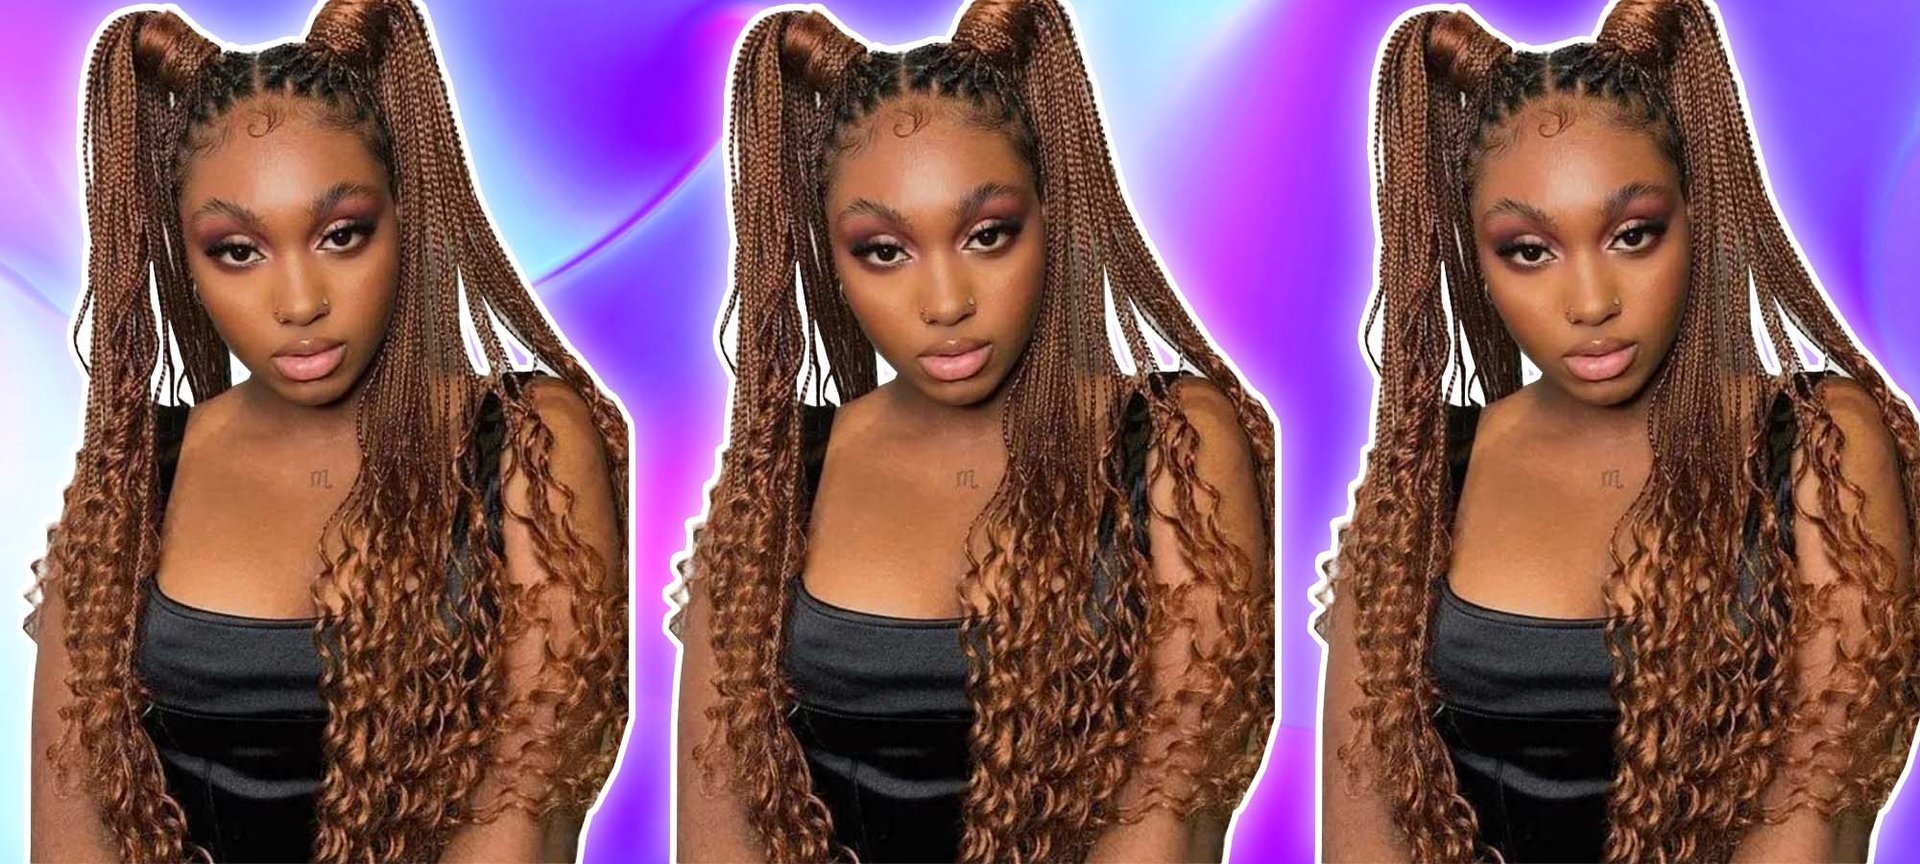 box braids with curly ends  Hair beauty, Hair styles, Braided hairstyles